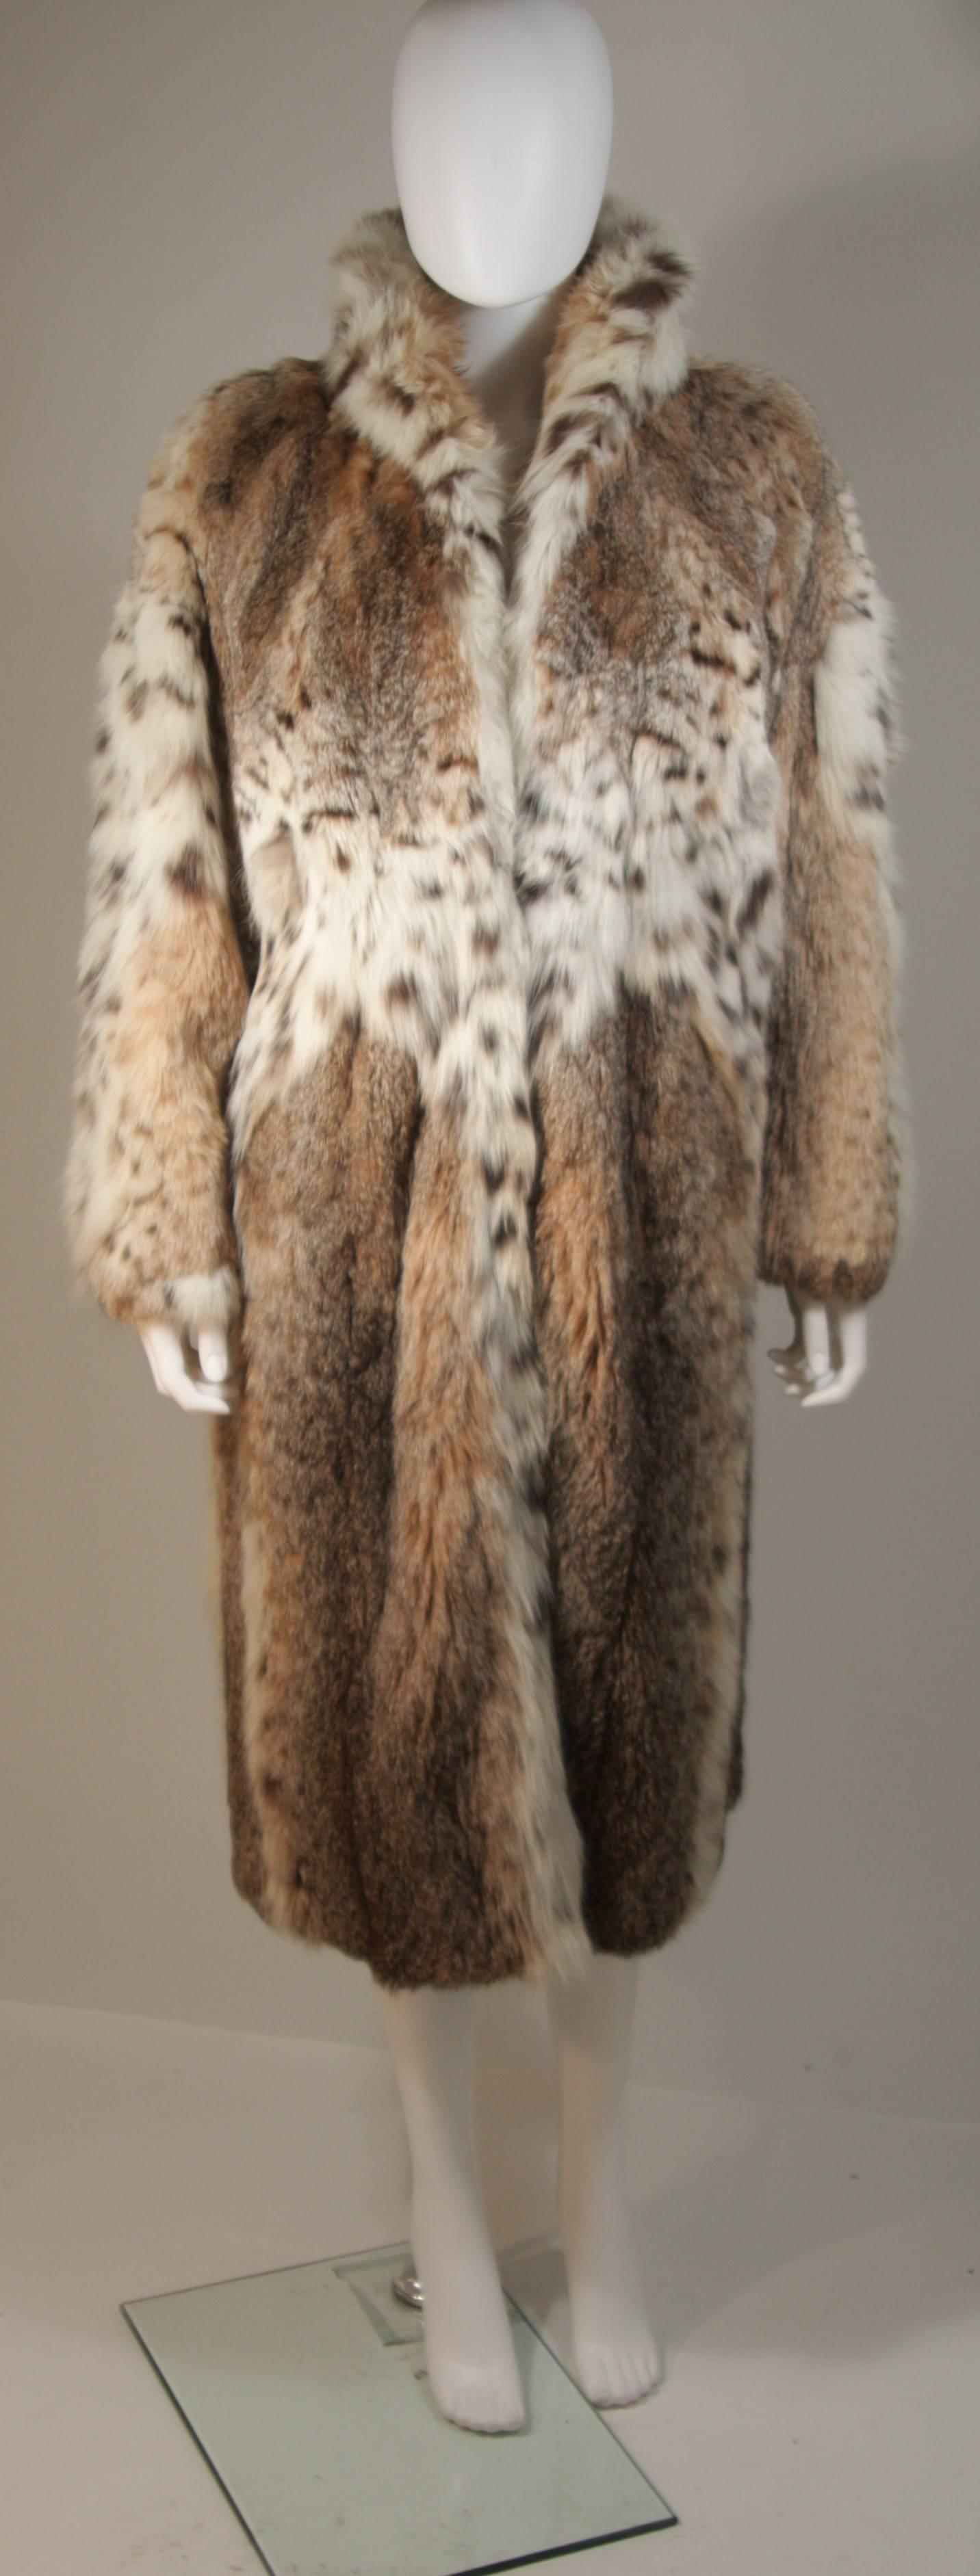 This Lynx coat is composed a very supple lynx. There are front closures and velvet corduroy lined side pockets. In excellent condition.

**Please cross-reference measurements for personal accuracy. 

Measurements (Approximately)  
Length: